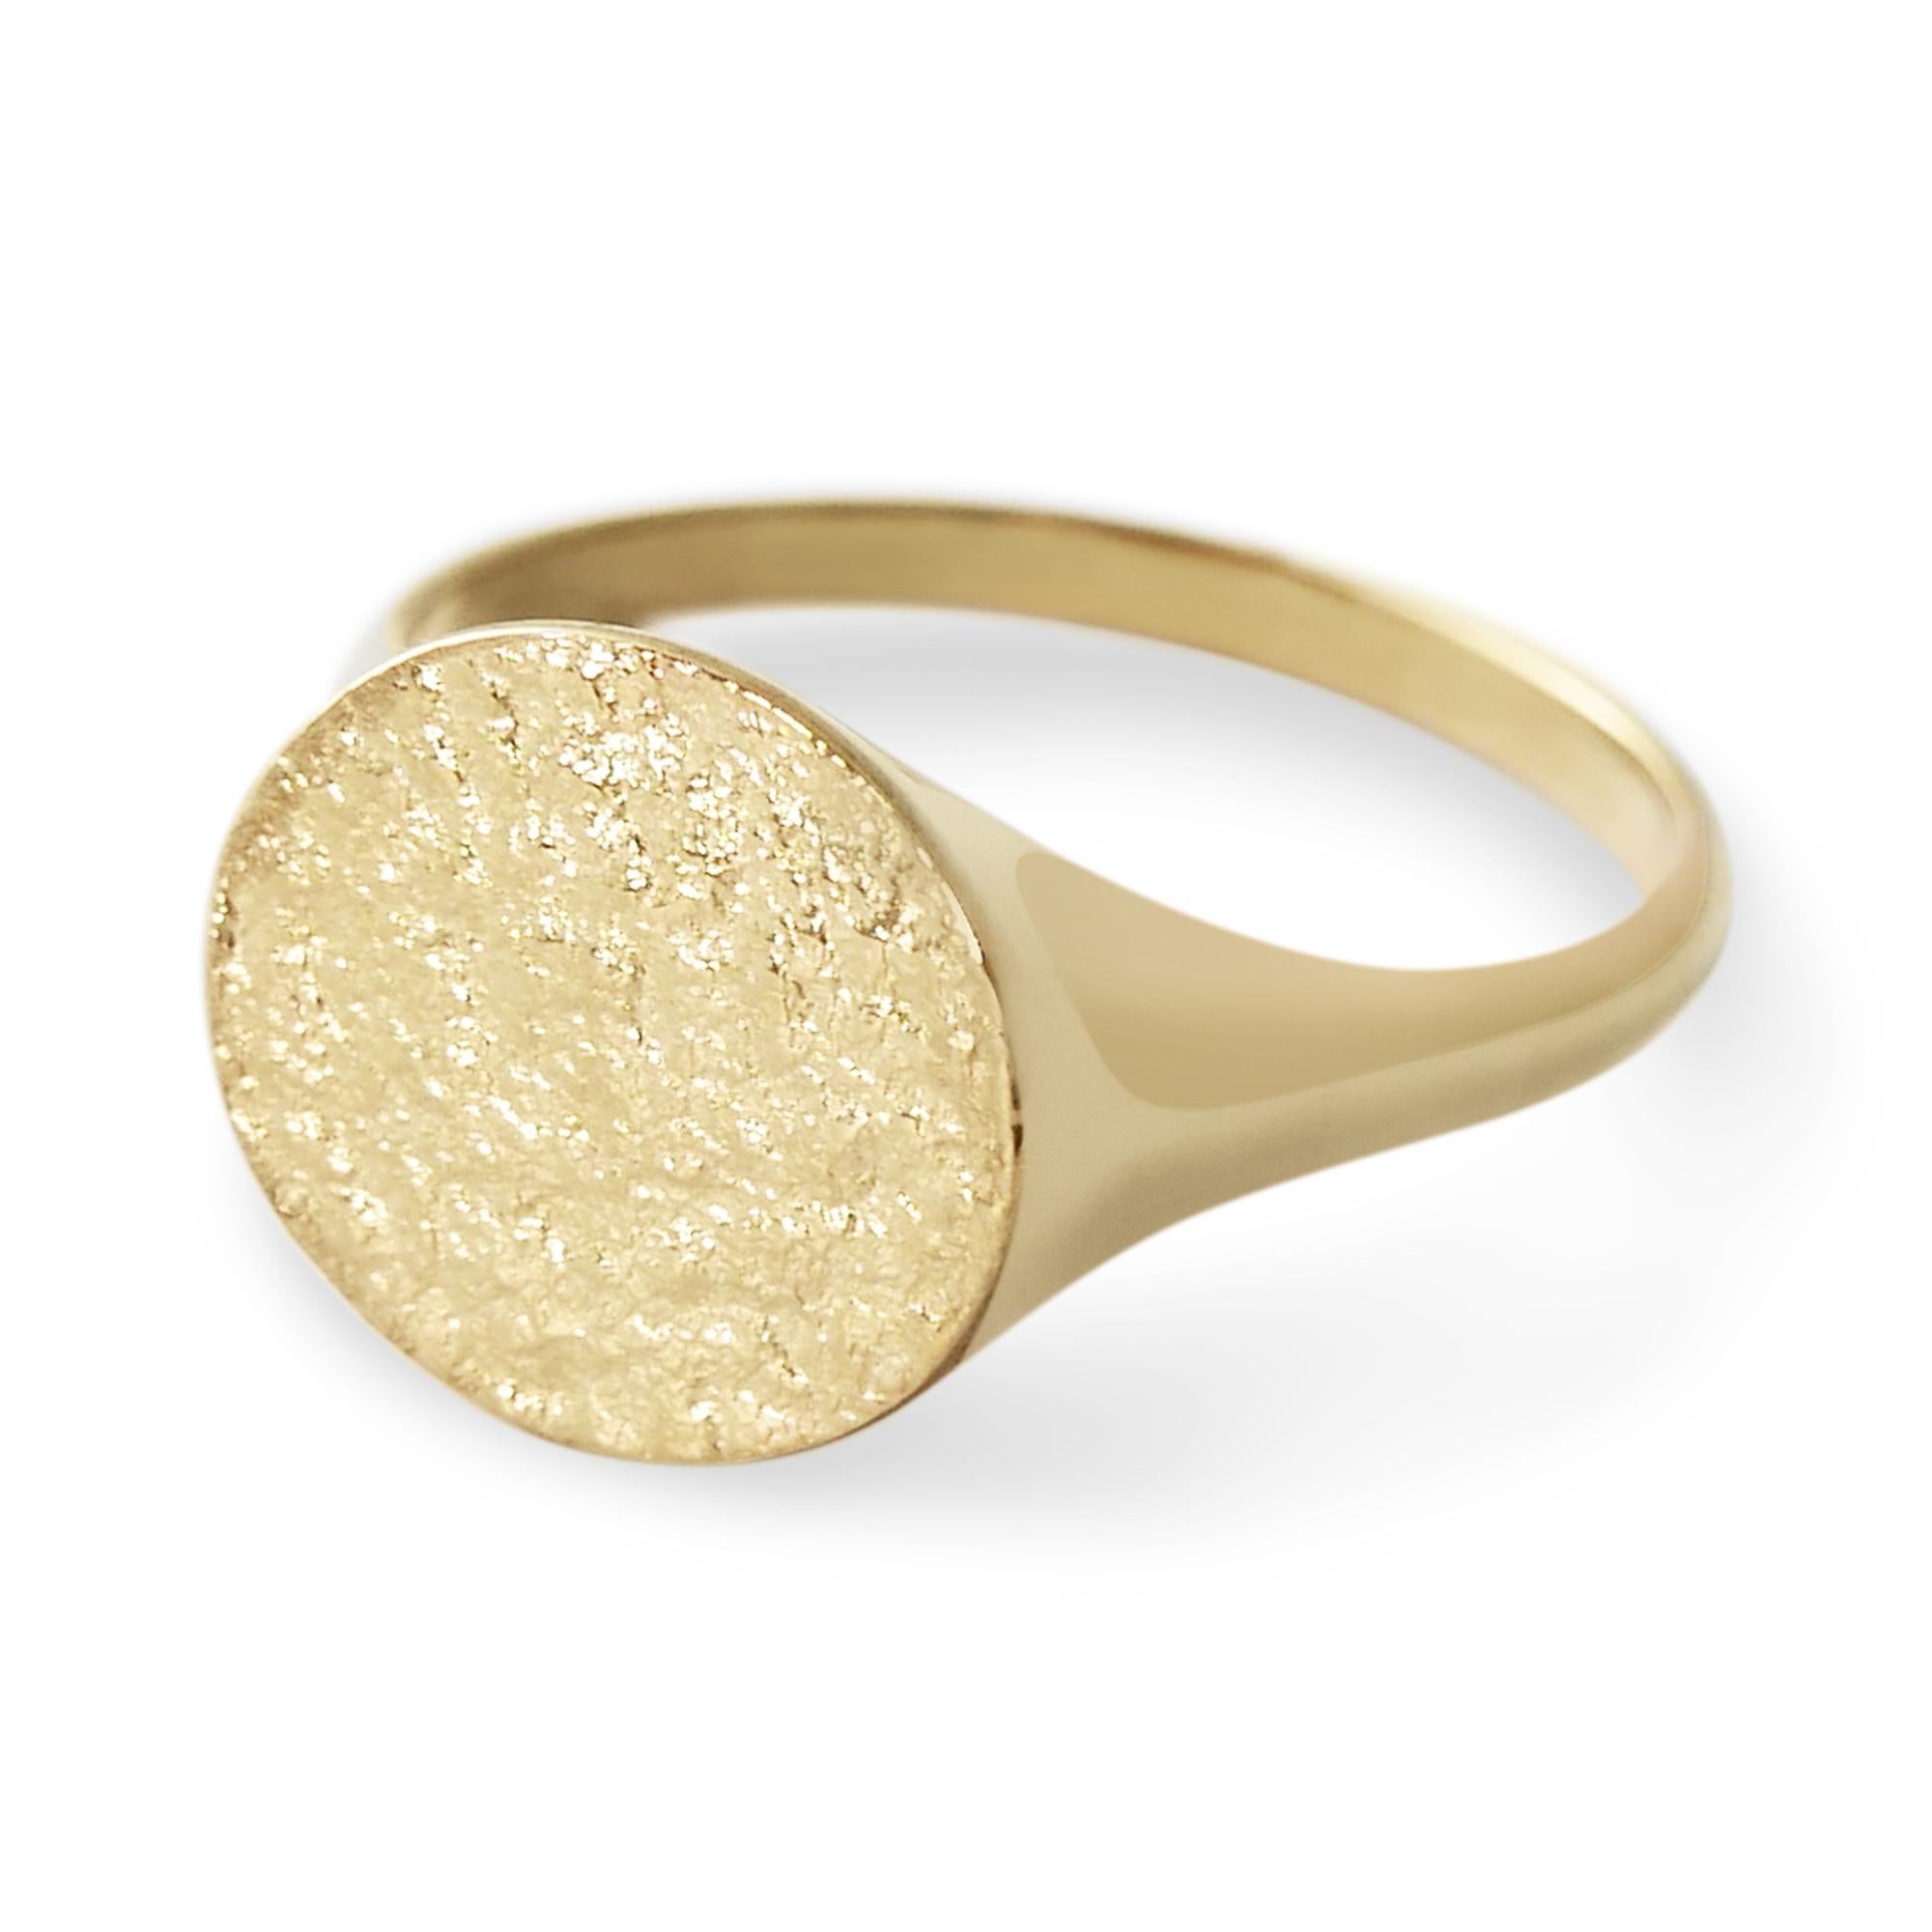 This textured signet ring crafted in solid 9-carat gold has a unique shimmering texture on the face and a high polish finish on the band for a comfortable fit.  Available in UK size M 1/2 (equivalent to US size 6 1/4), can be resized upon request at